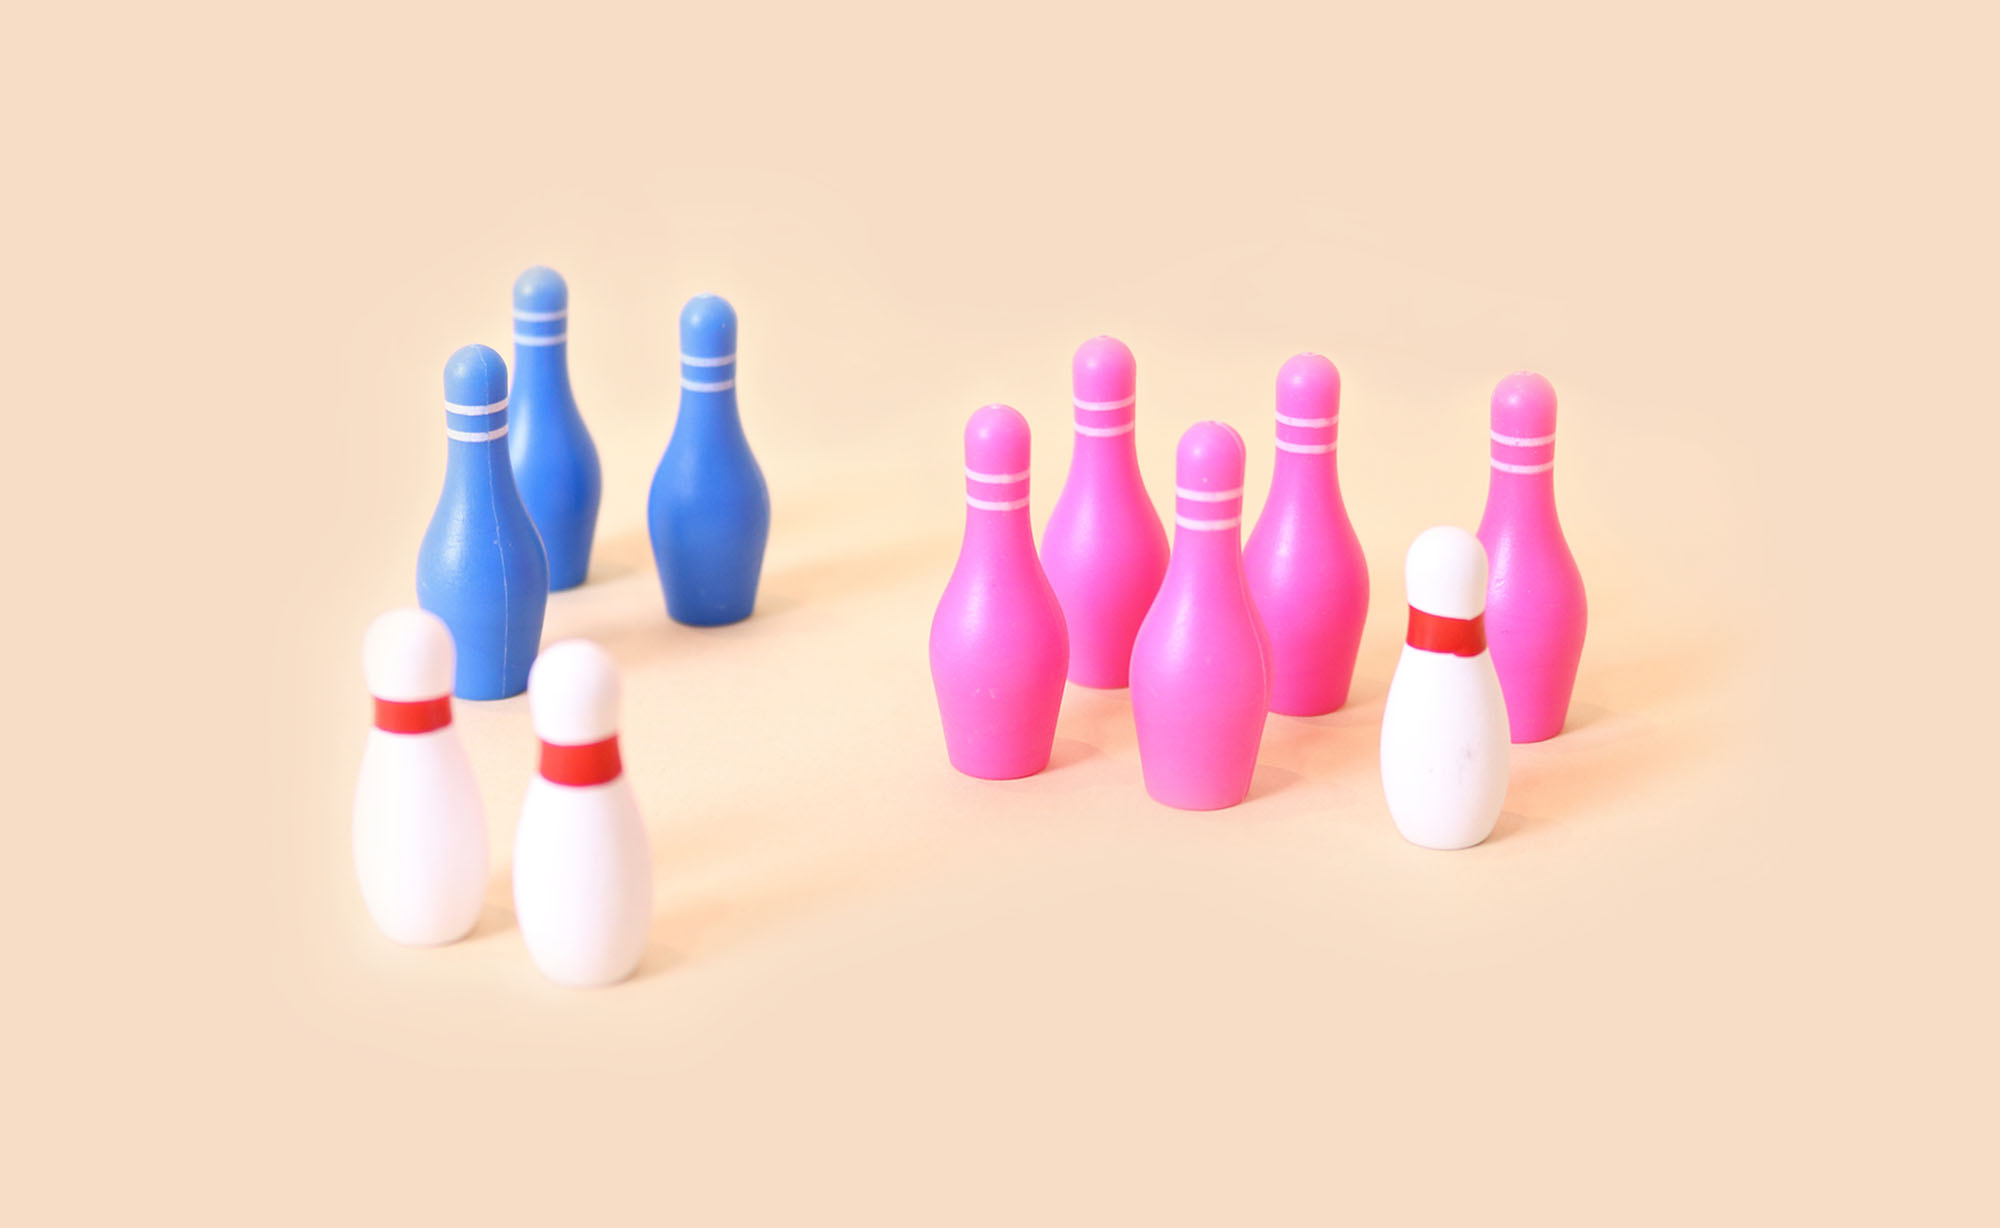 Blue, pink & white bowling pins in groups